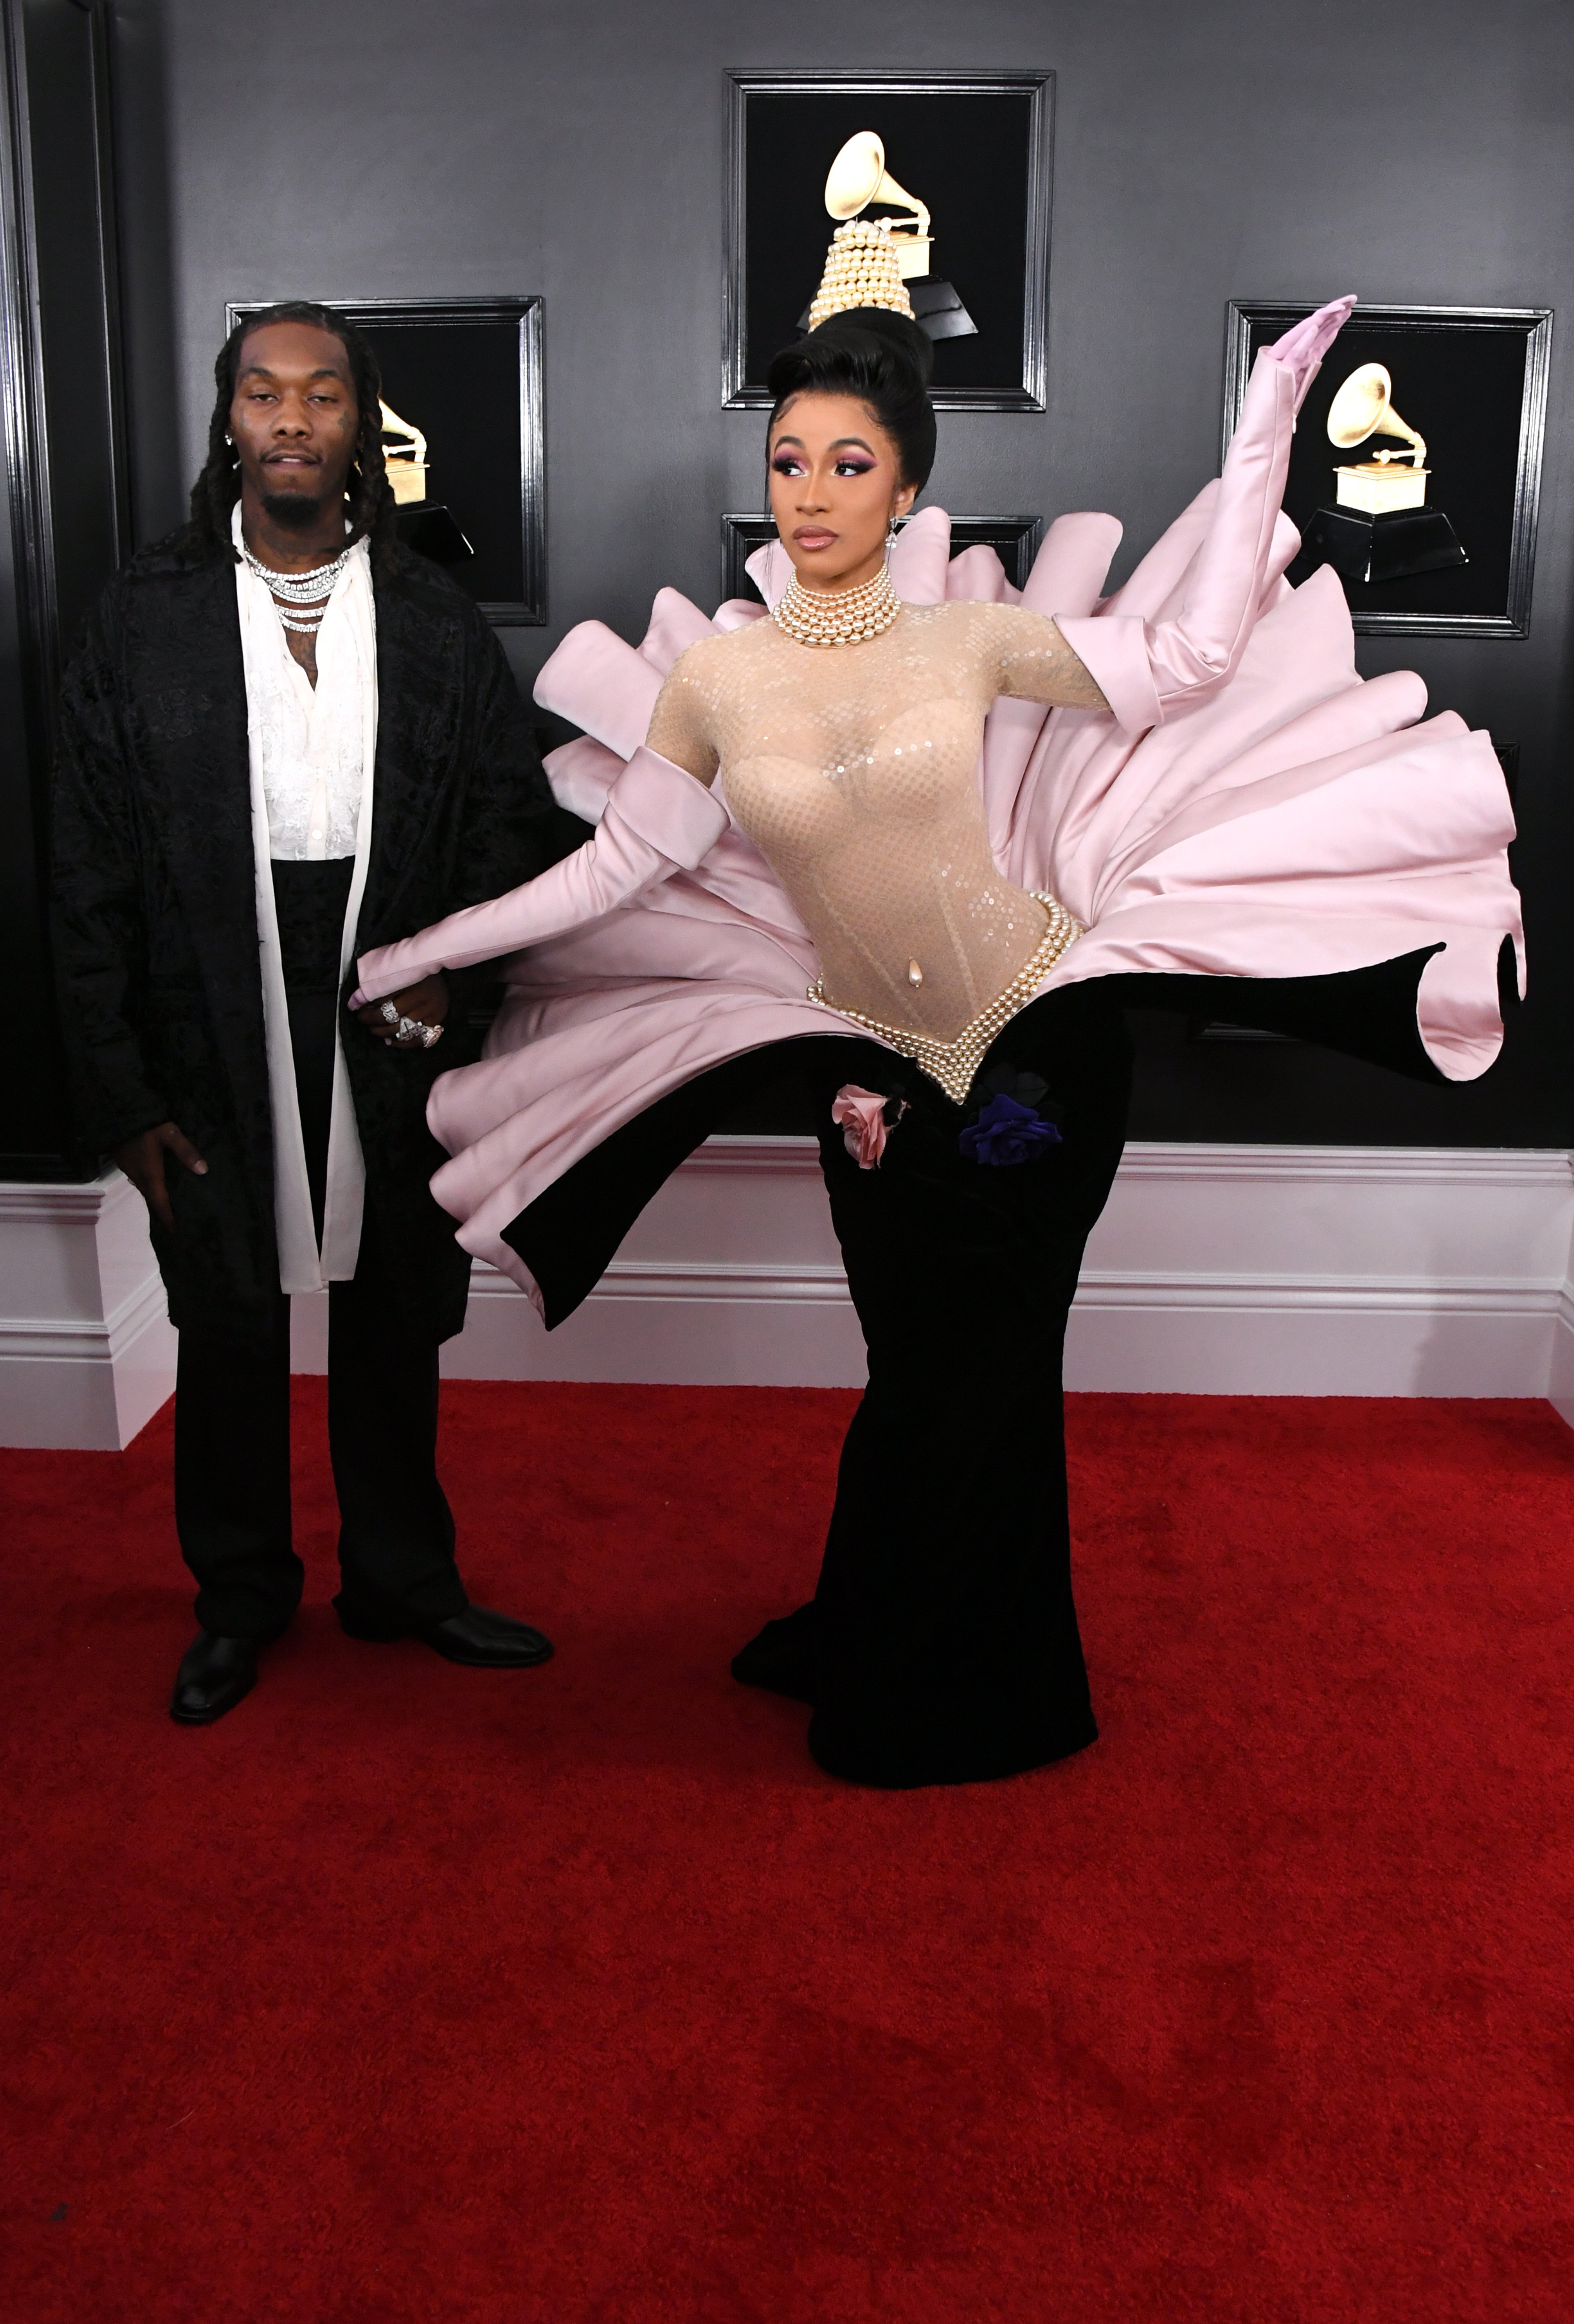 Cardi B & husband, Offset at the GRAMMY Awards in Los Angeles, California on Feb. 10, 2019. | Photo: Getty Images